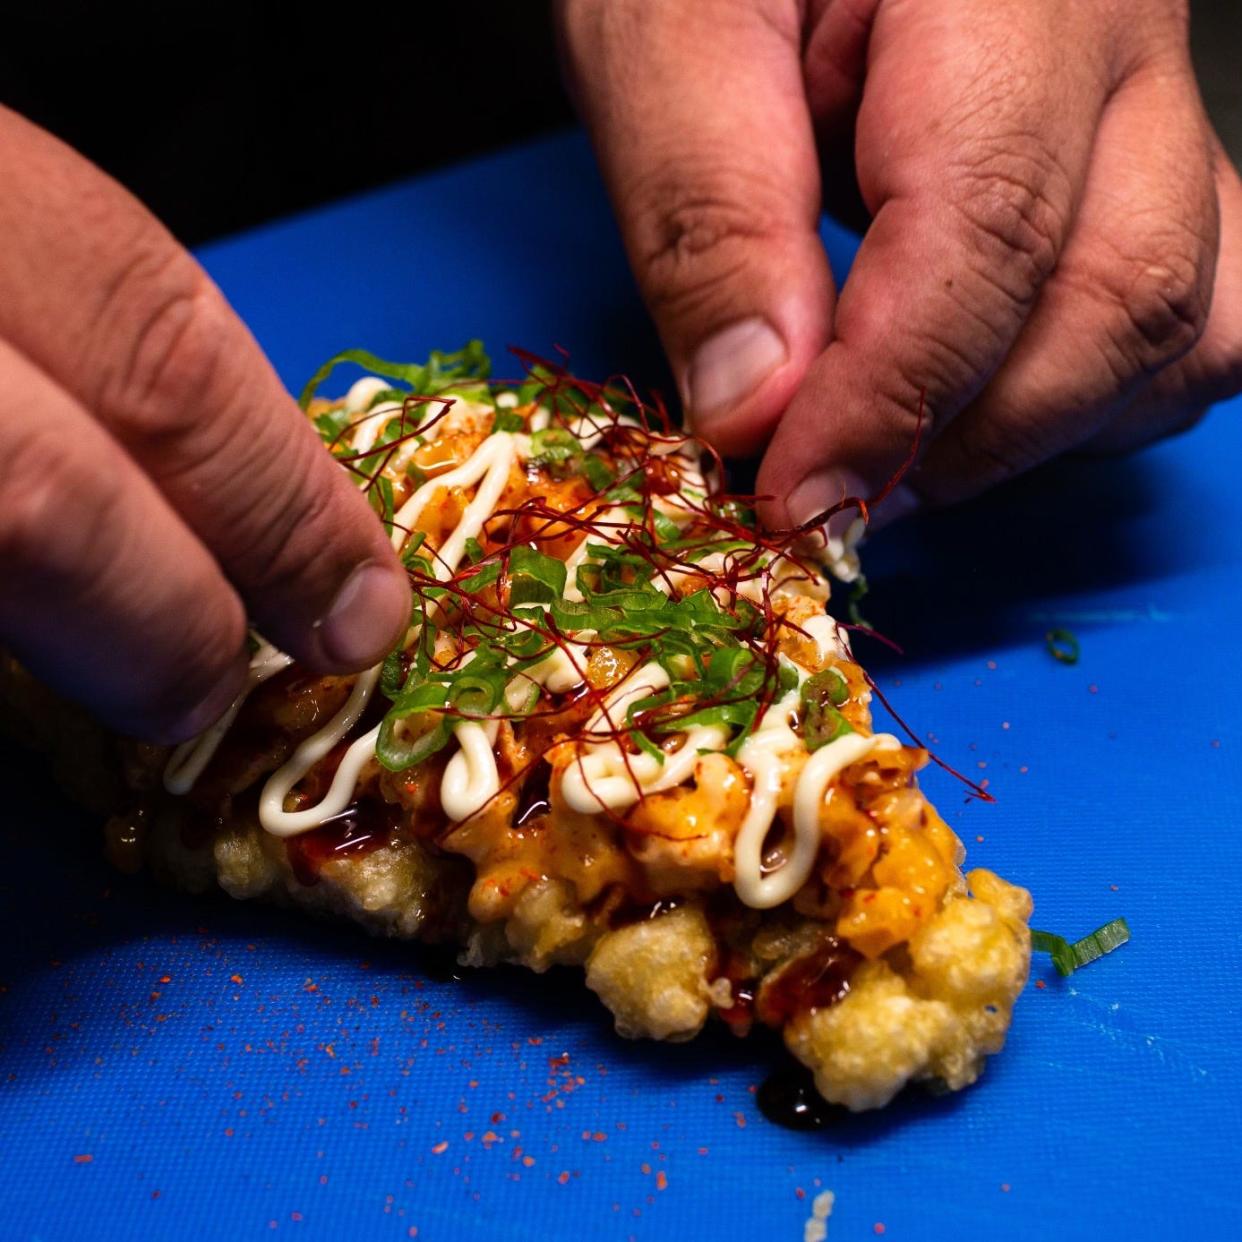 Bang Bang Shrimp Pizza -- with tempura-fried nori with rice, Bang Bang shrimp, green onions, chili strings and more -- will be one of several offerings at the one-time Sushi Pizza Party event being held May 18, 2024, at Skye Lounge in downtown Nashville